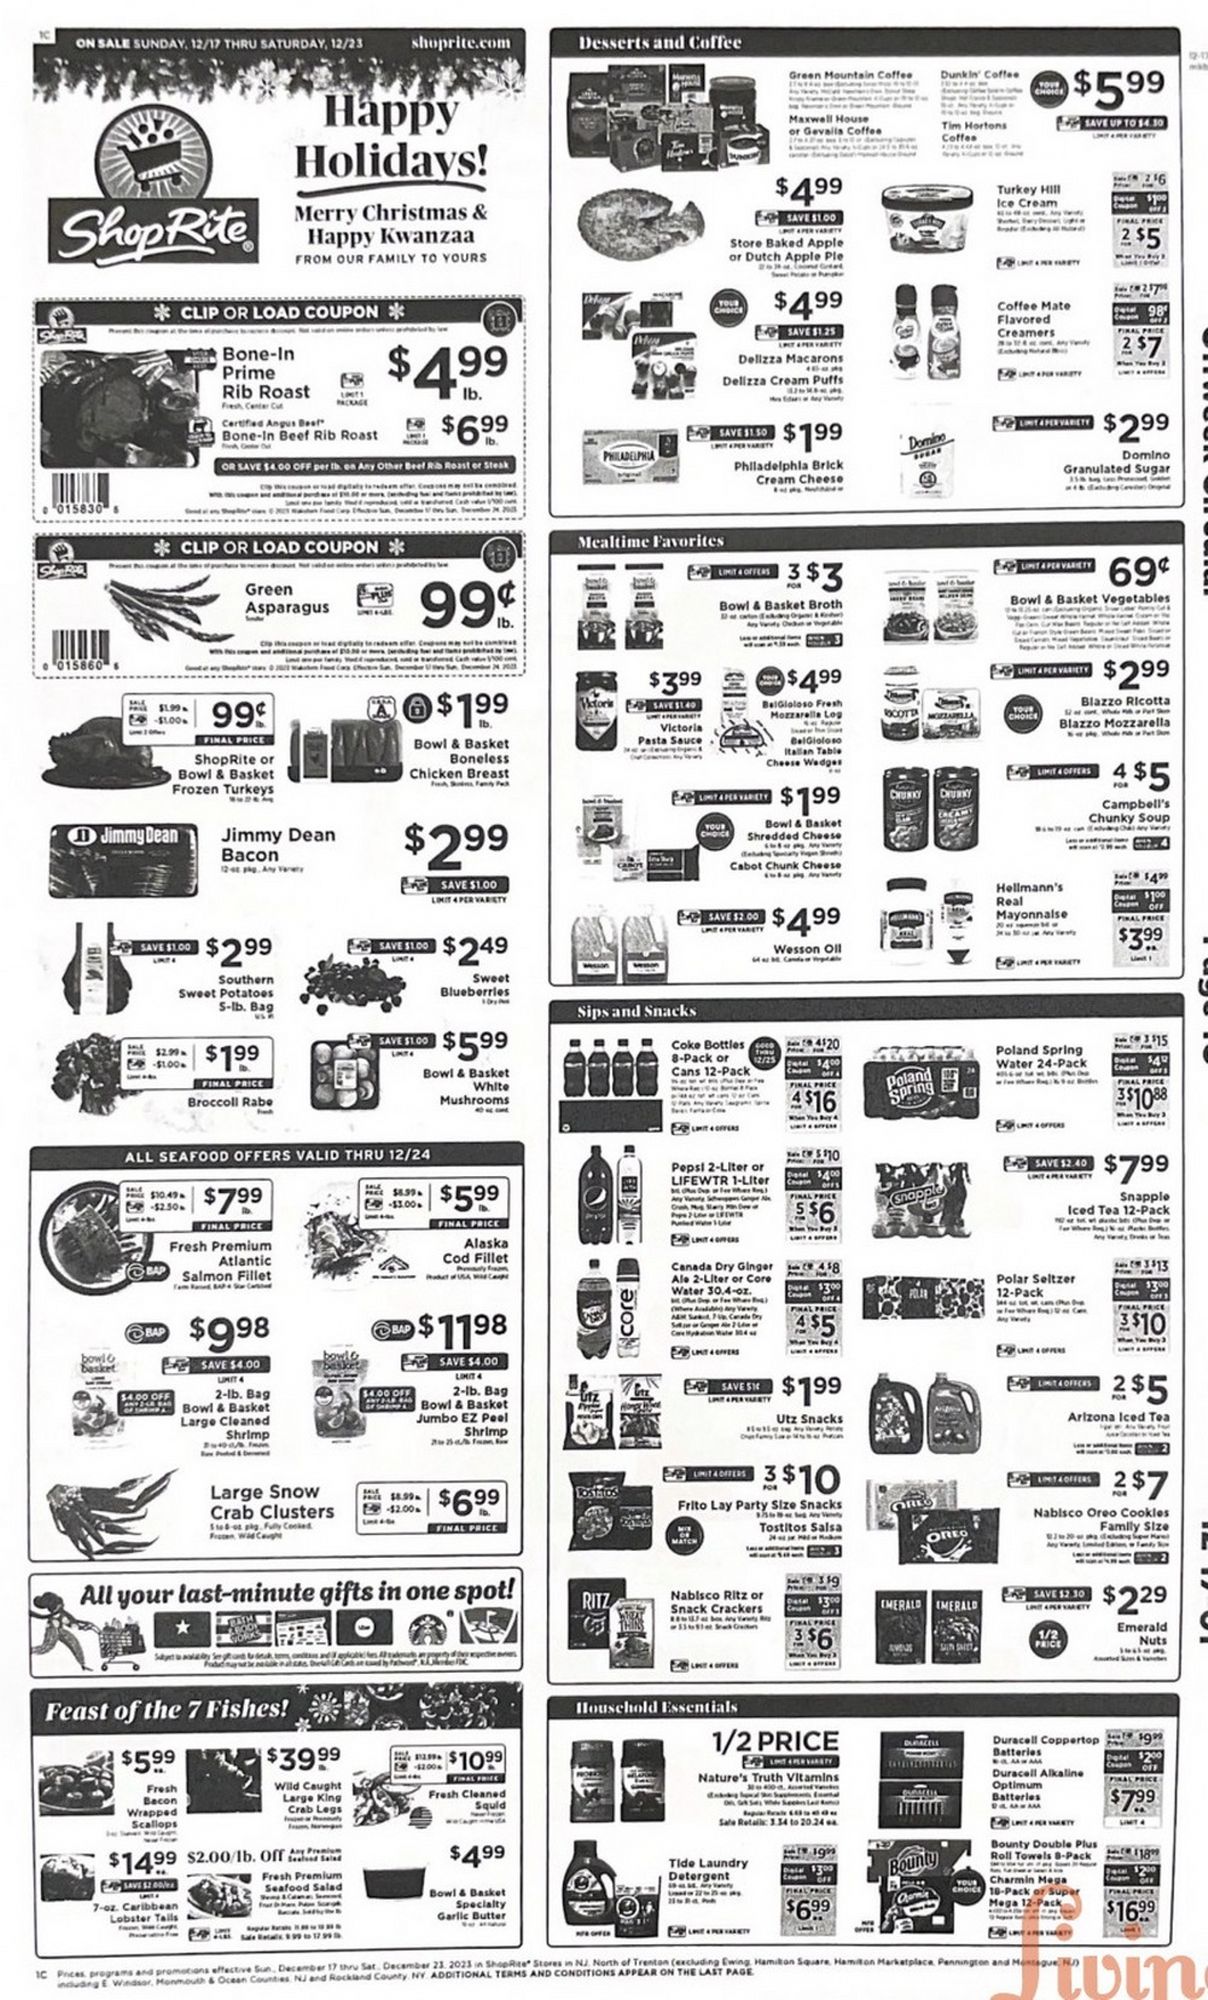 Shoprite Christmas July 2024 Weekly Sales, Deals, Discounts and Digital Coupons.